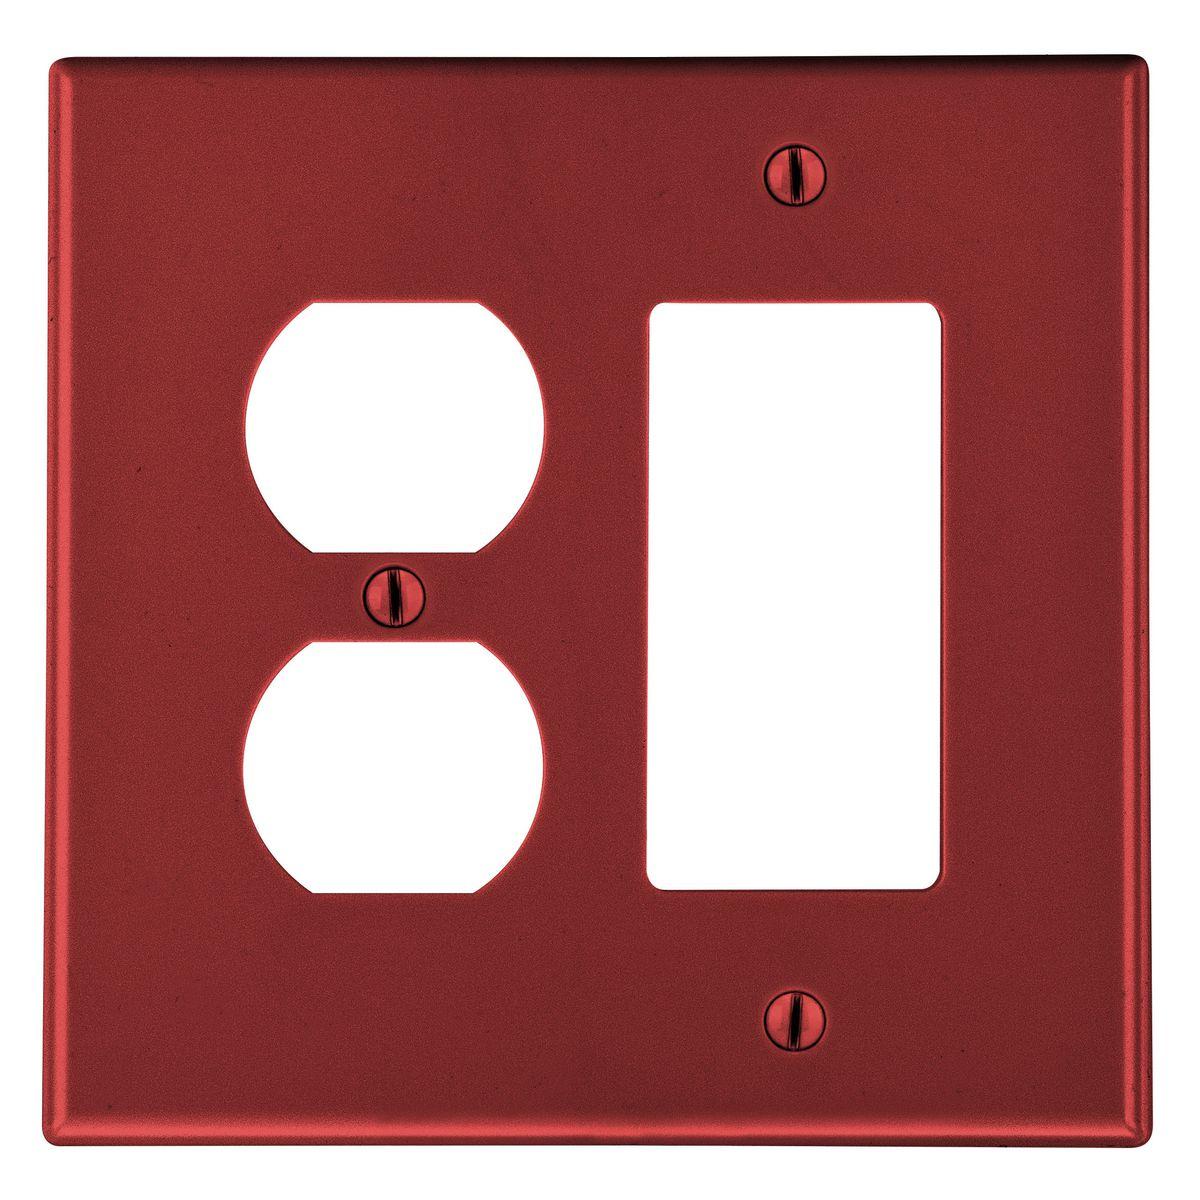 Hubbell P826R Wallplate, 2-Gang,  1) Duplex 1) Decorator, Red  ; High-impact, self-extinguishing polycarbonate material ; More Rigid ; Sharp lines and less dimpling ; Smooth satin finish ; Blends into wall with an optimum finish ; Smooth Satin Finish